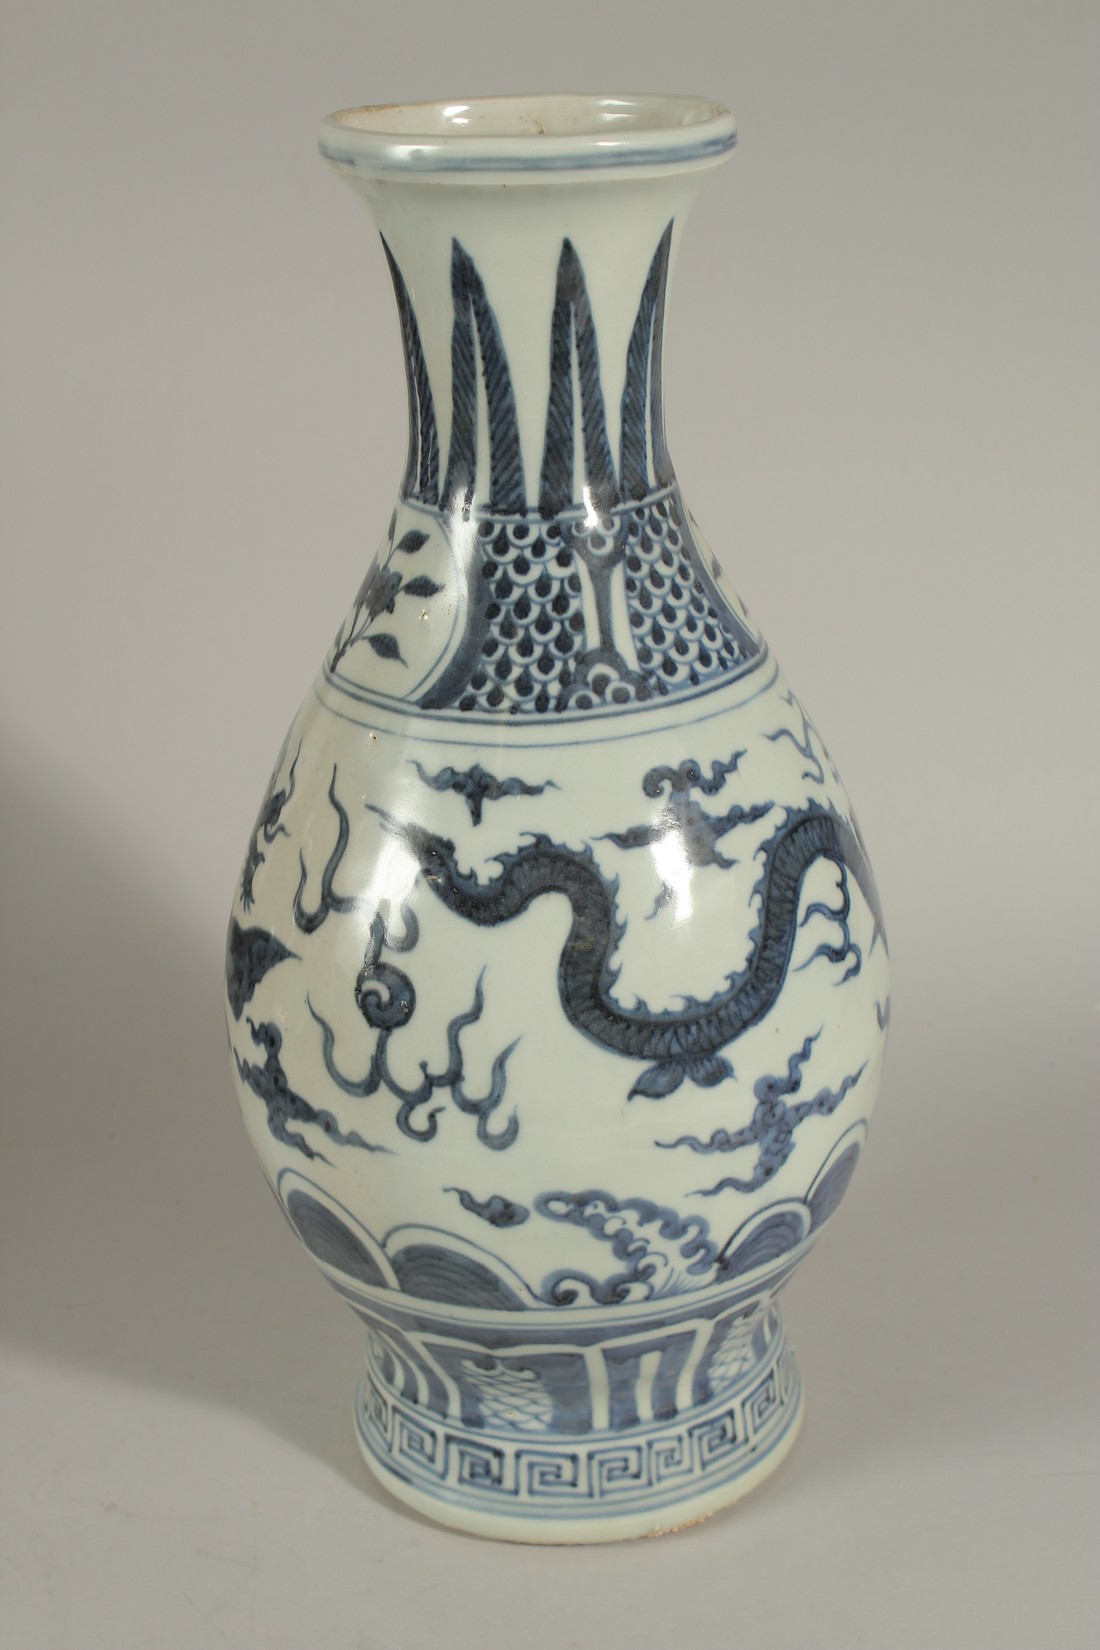 A CHINESE BLUE AND WHITE PORCELAIN DRAGON VASE, designed with two dragons chasing the flaming - Image 2 of 5